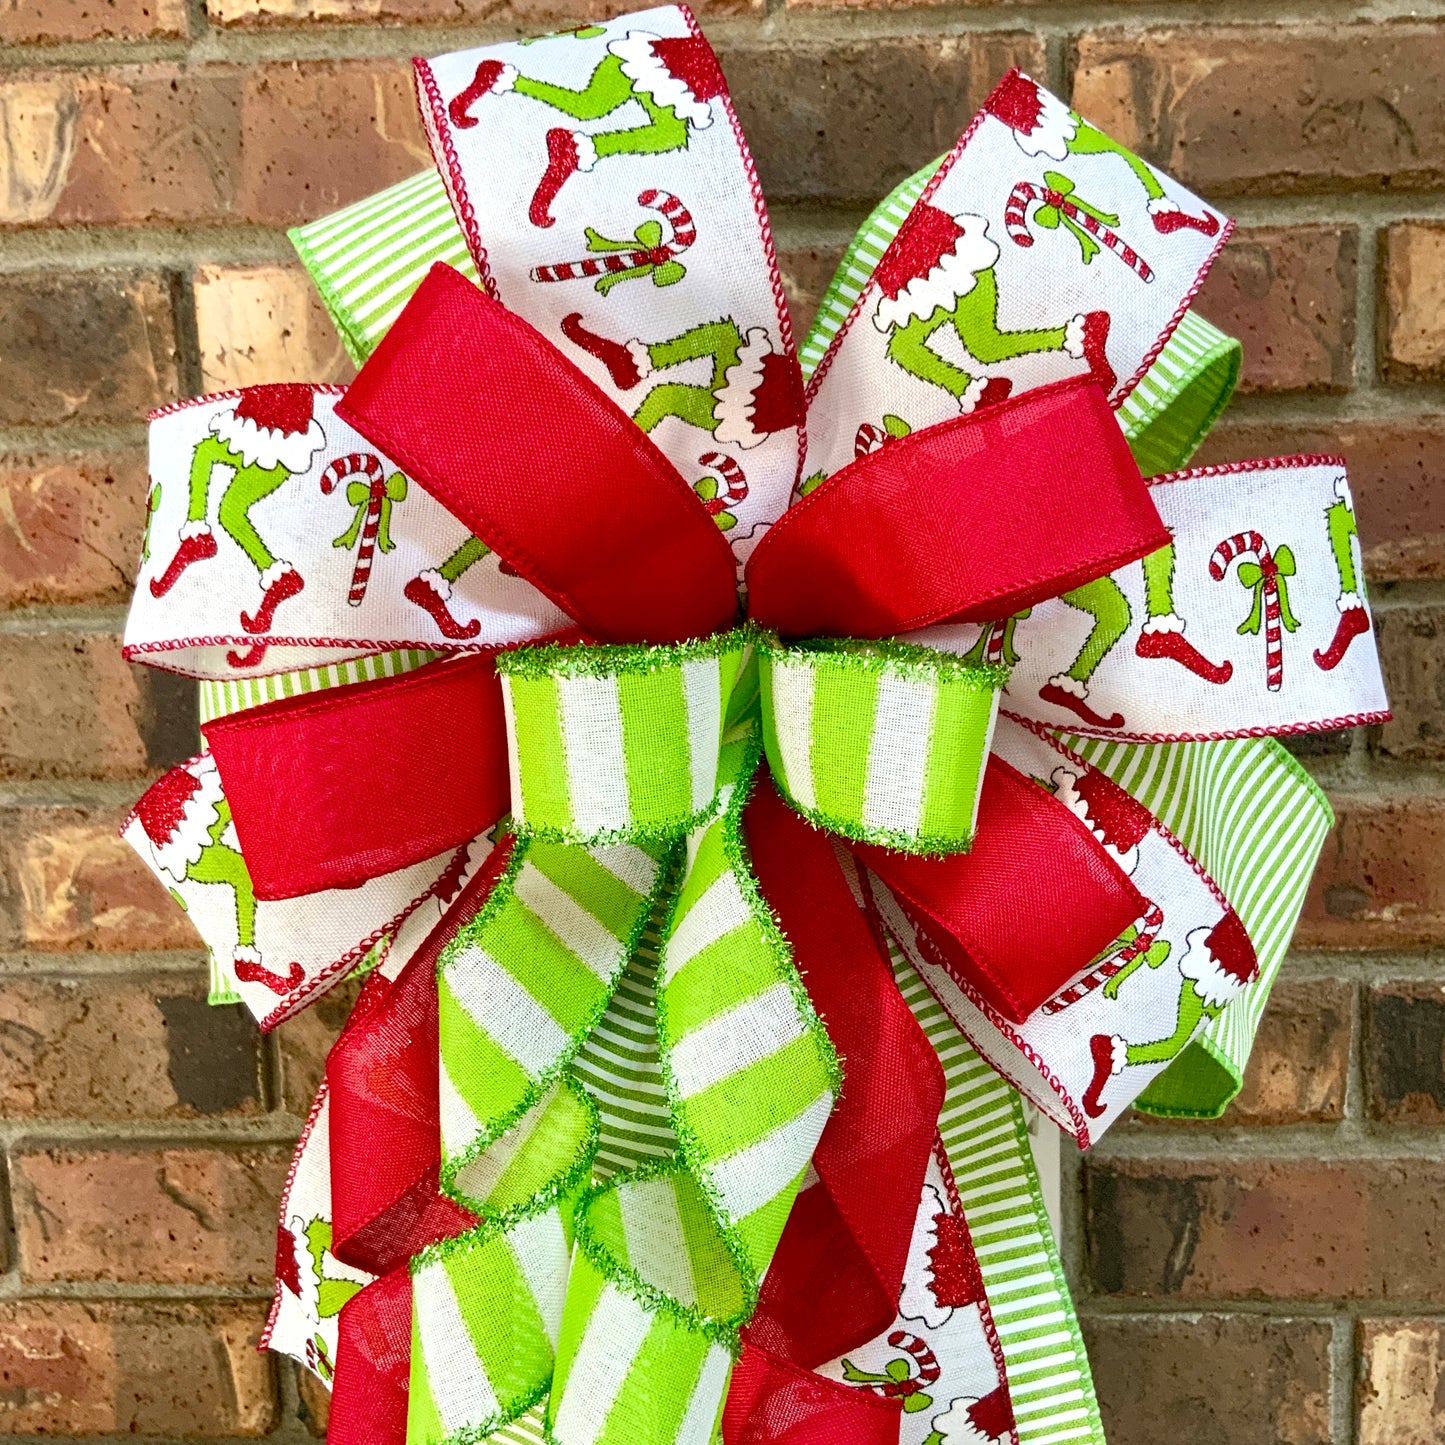 Christmas Bow for Lanterns, Grinch Bow, Christmas Mailbox Decor, Grinch Decor, Christmas Sconce Bow, Christmas Bow For Wreaths